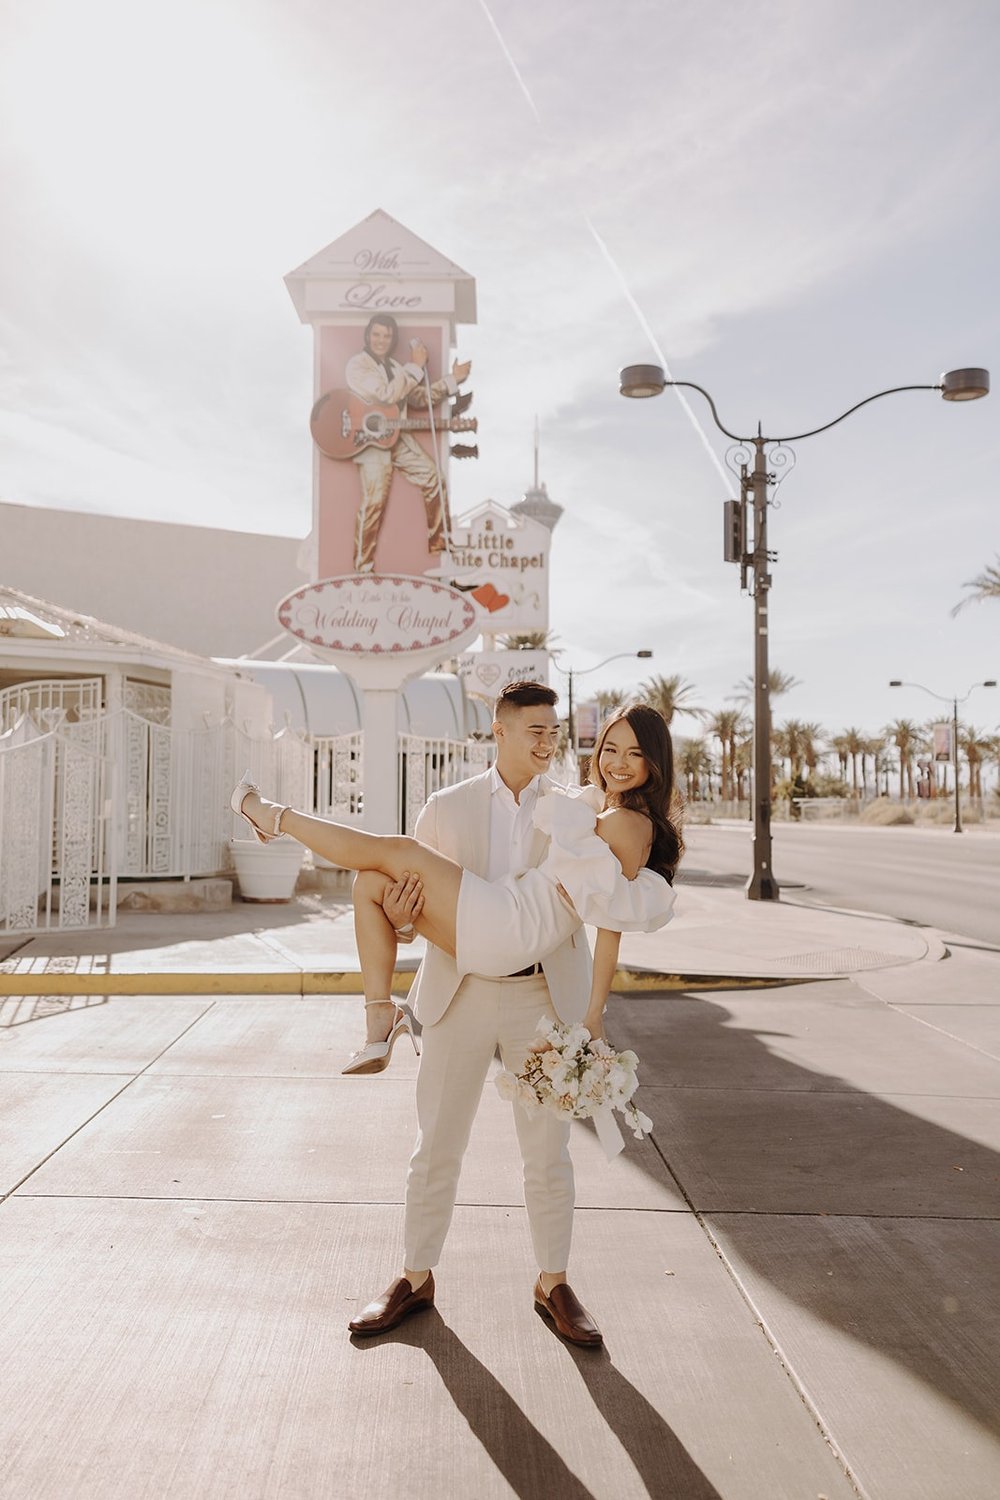 Groom picks up bride for a photo in front of the Little White Chapel sign during their Las Vegas elopement